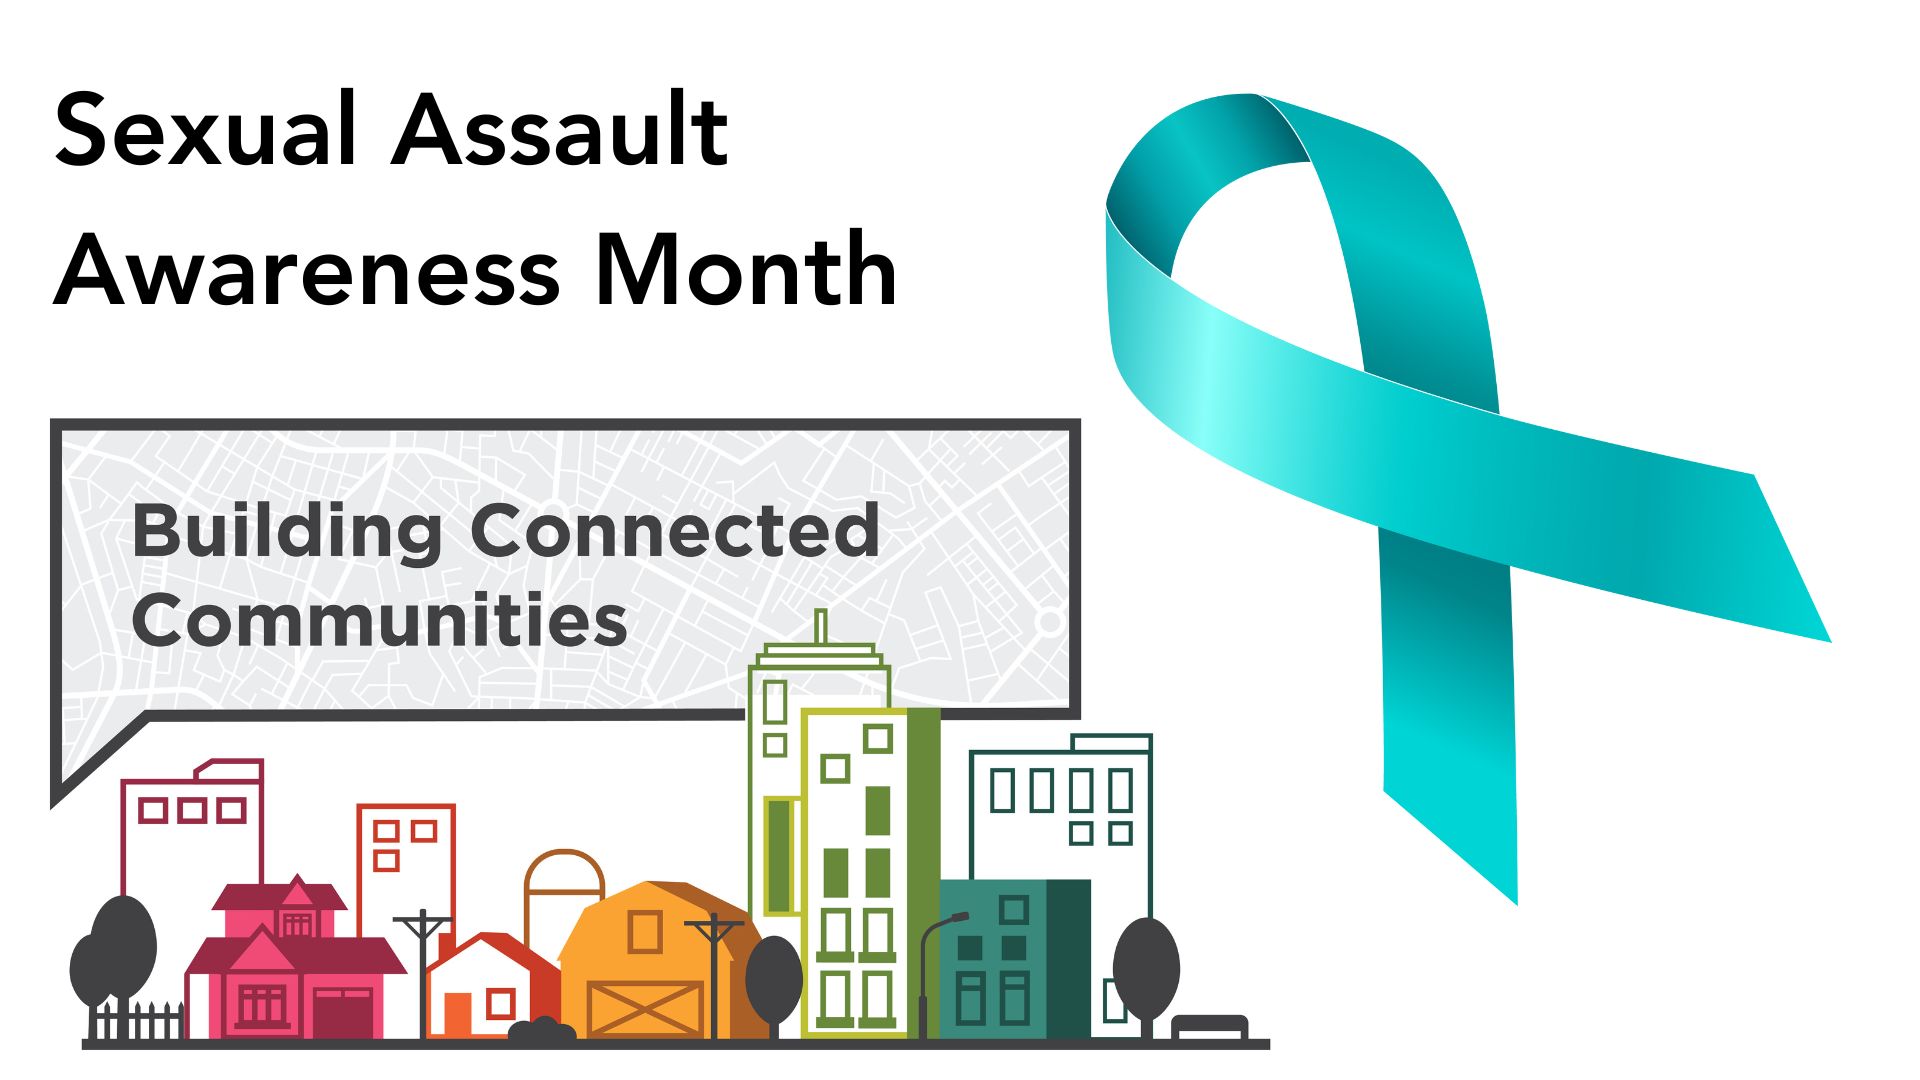 Sexual Assault Awareness Month
Building Connected Communities
Colorful building landscape with teal ribbon